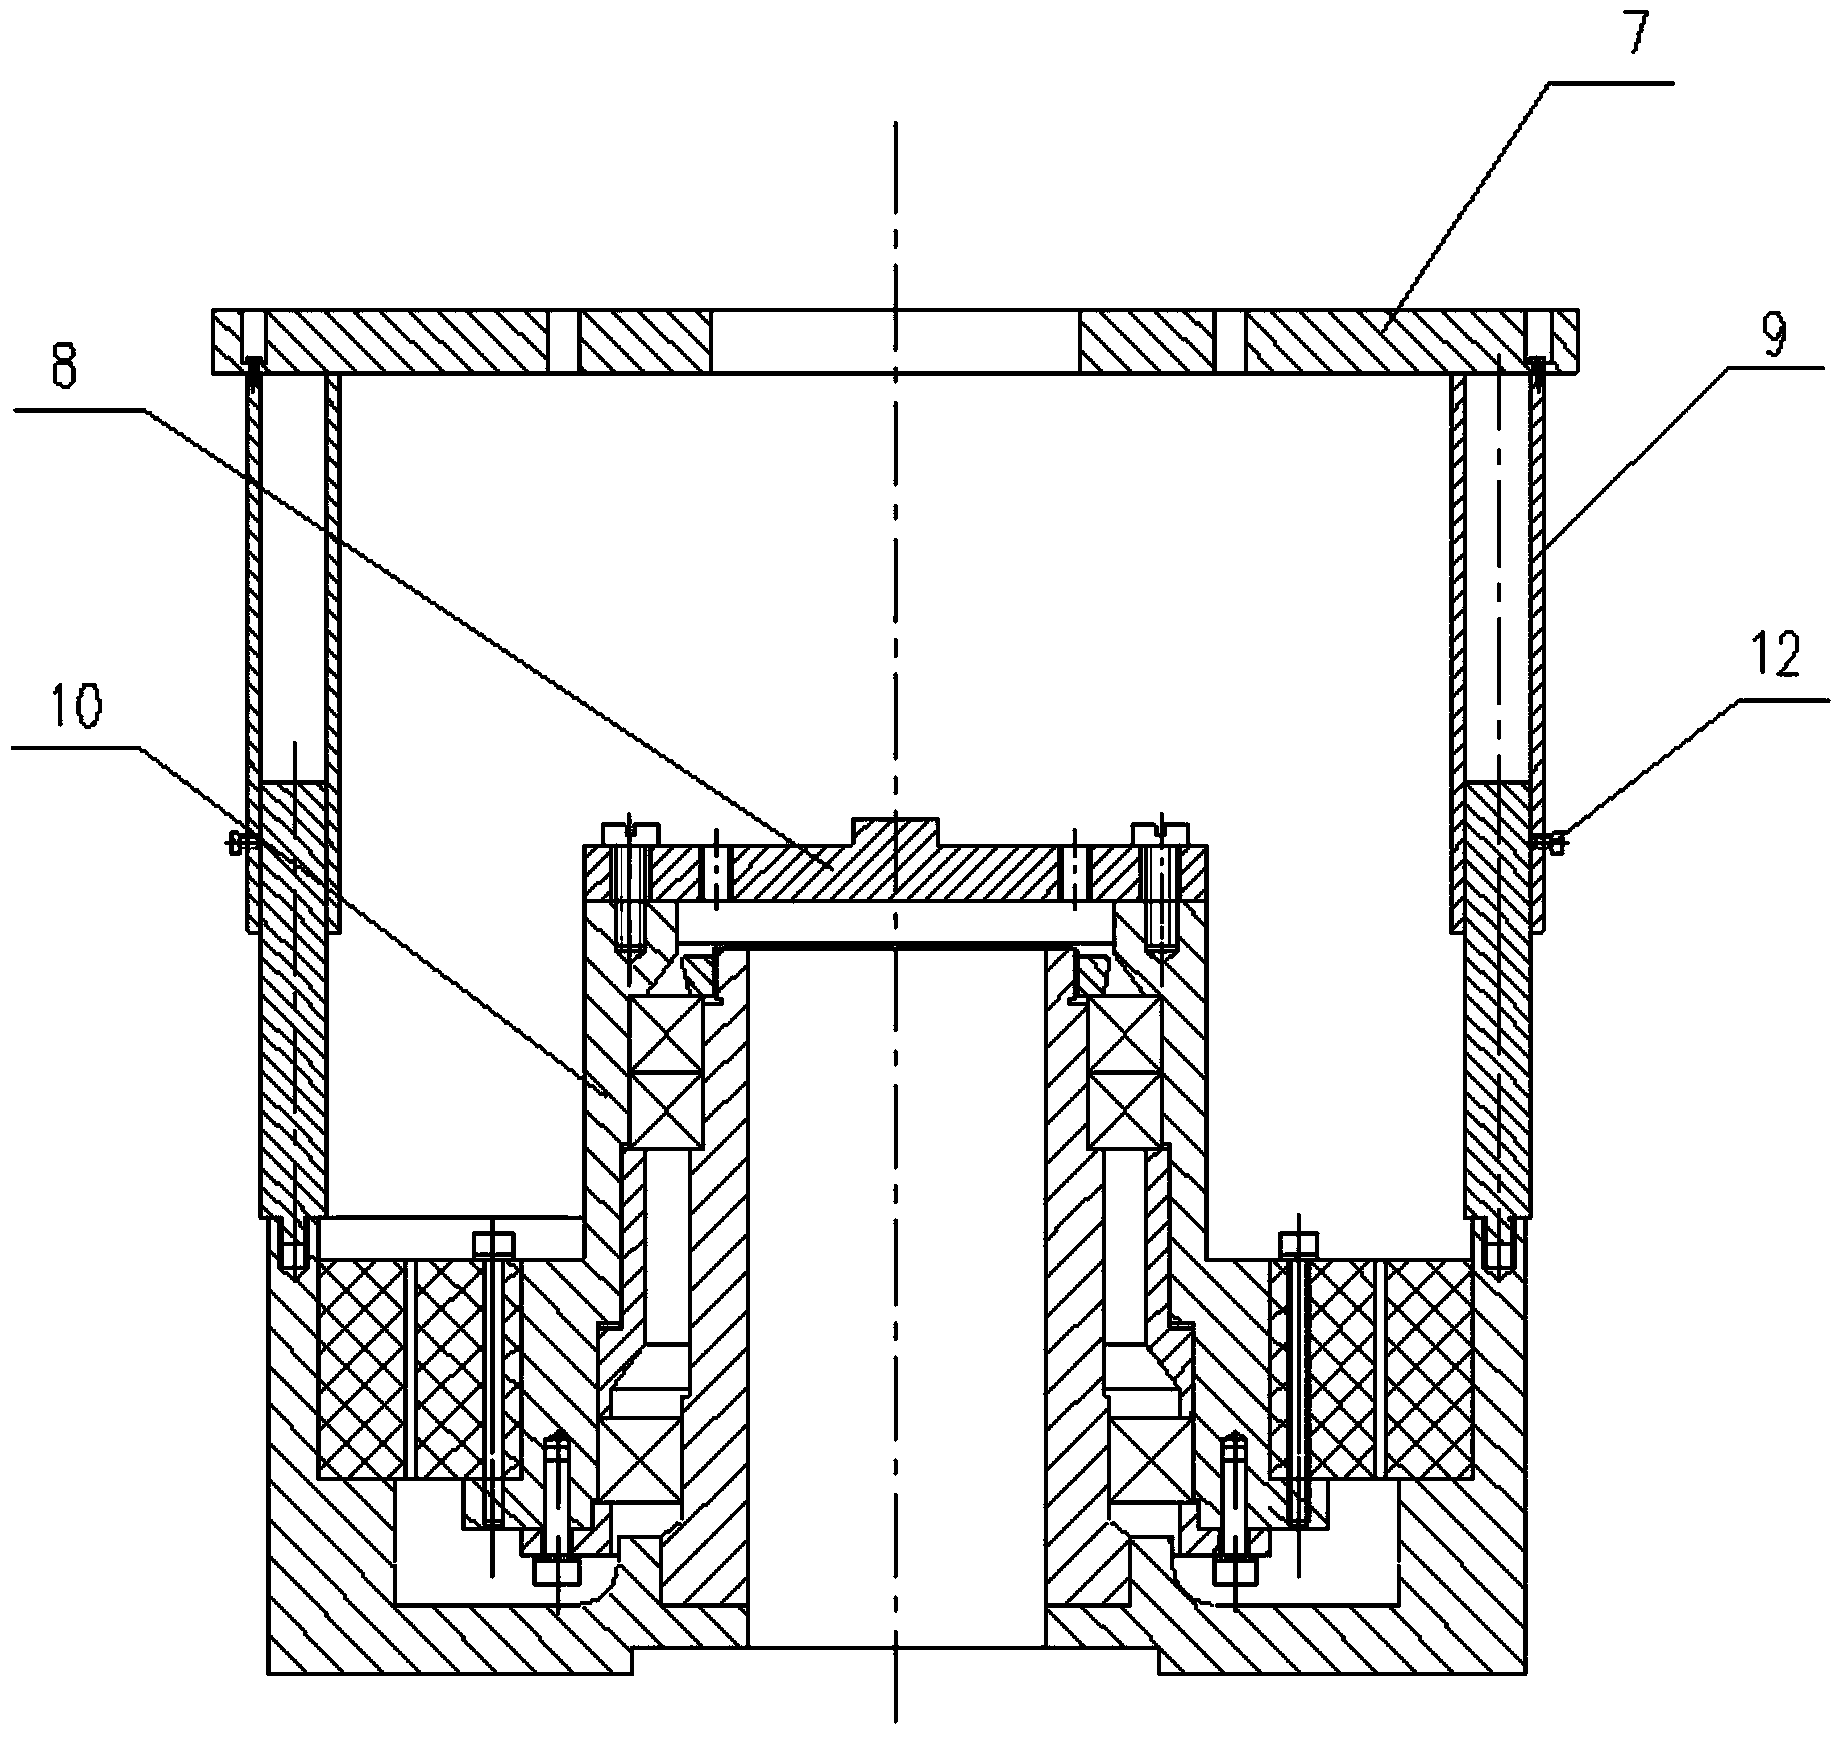 Collector ring rotating state electrical performance detecting device